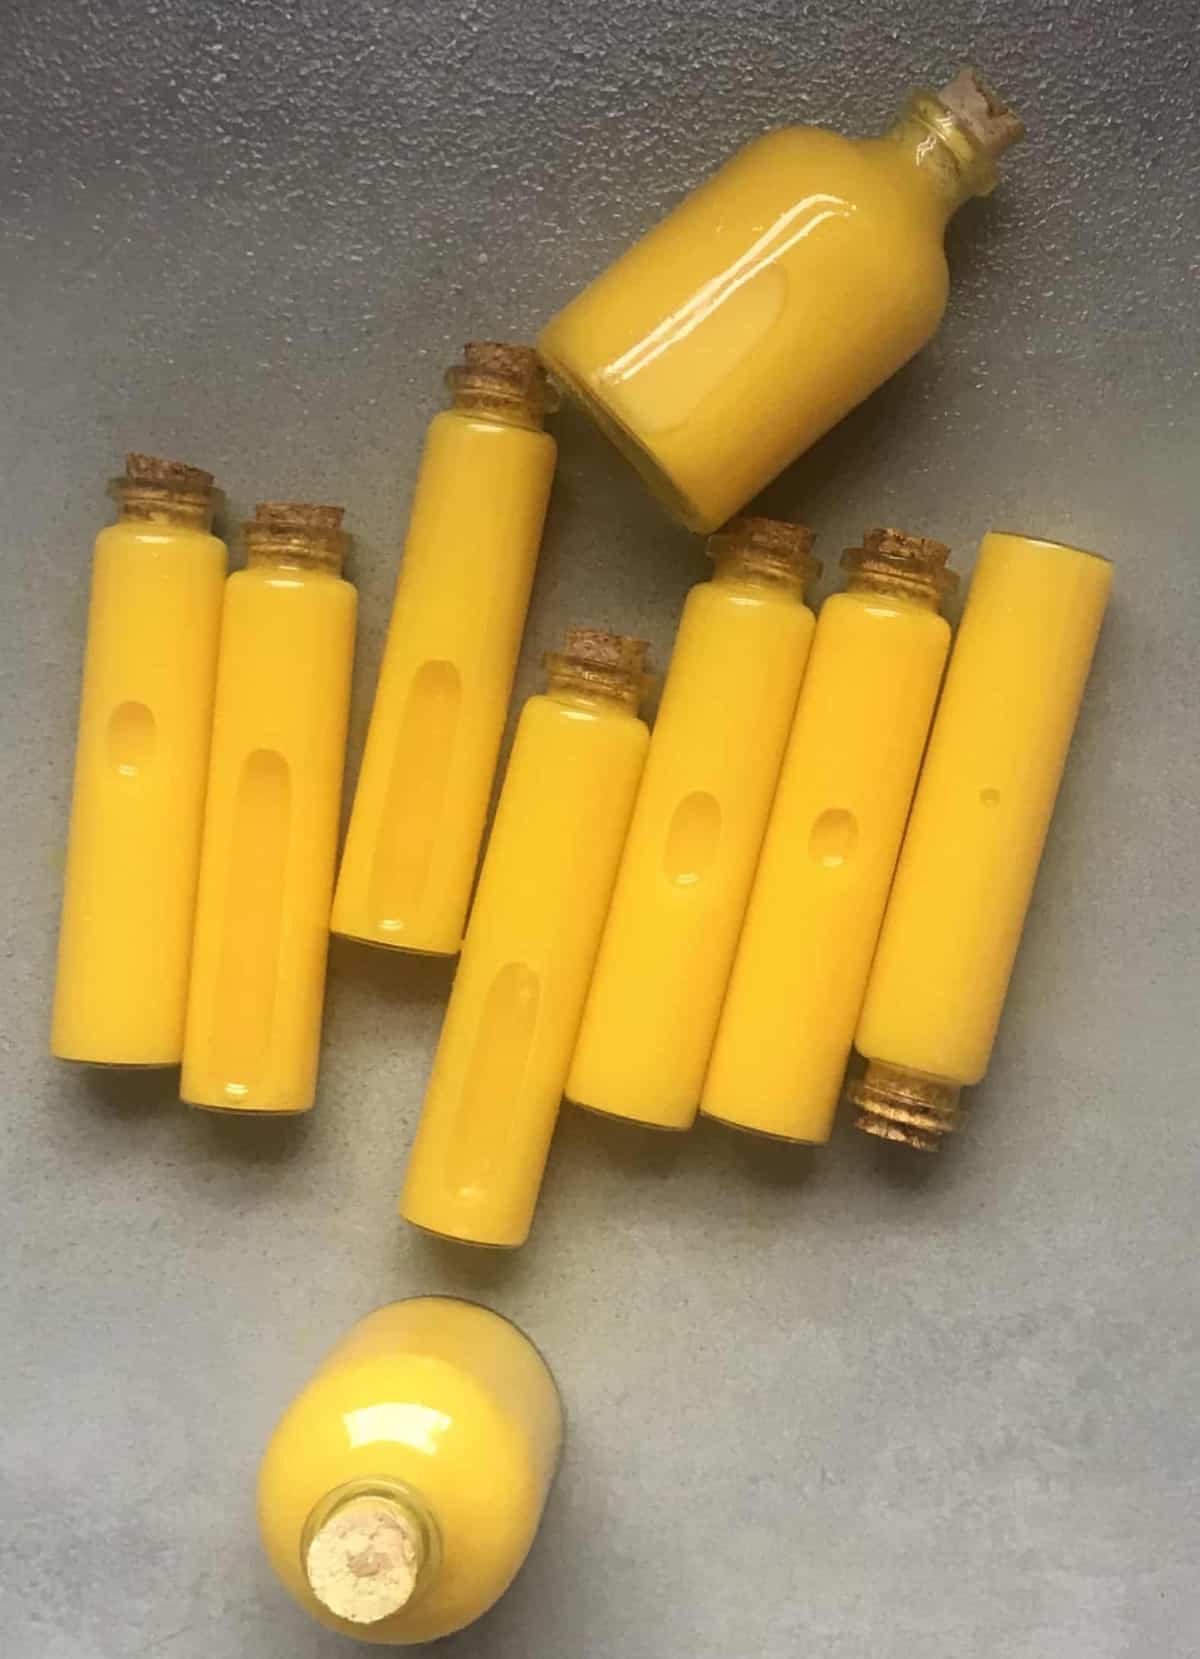 Nine small glass vials filled with turmeric and lemon shots laying on a flat gray surface